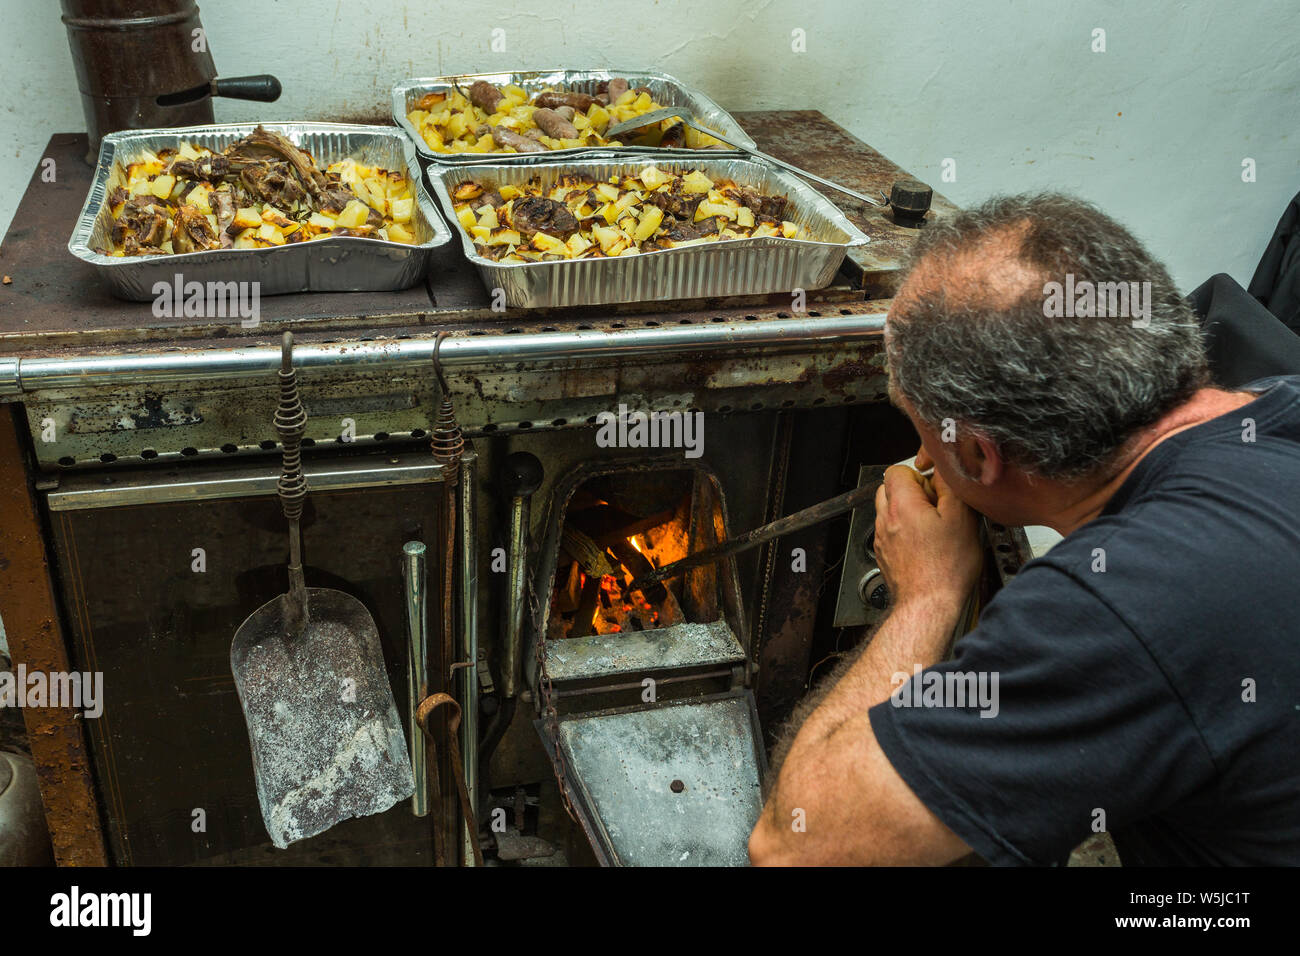 preparation of Panarda. A great banquet that lasts all night Stock Photo